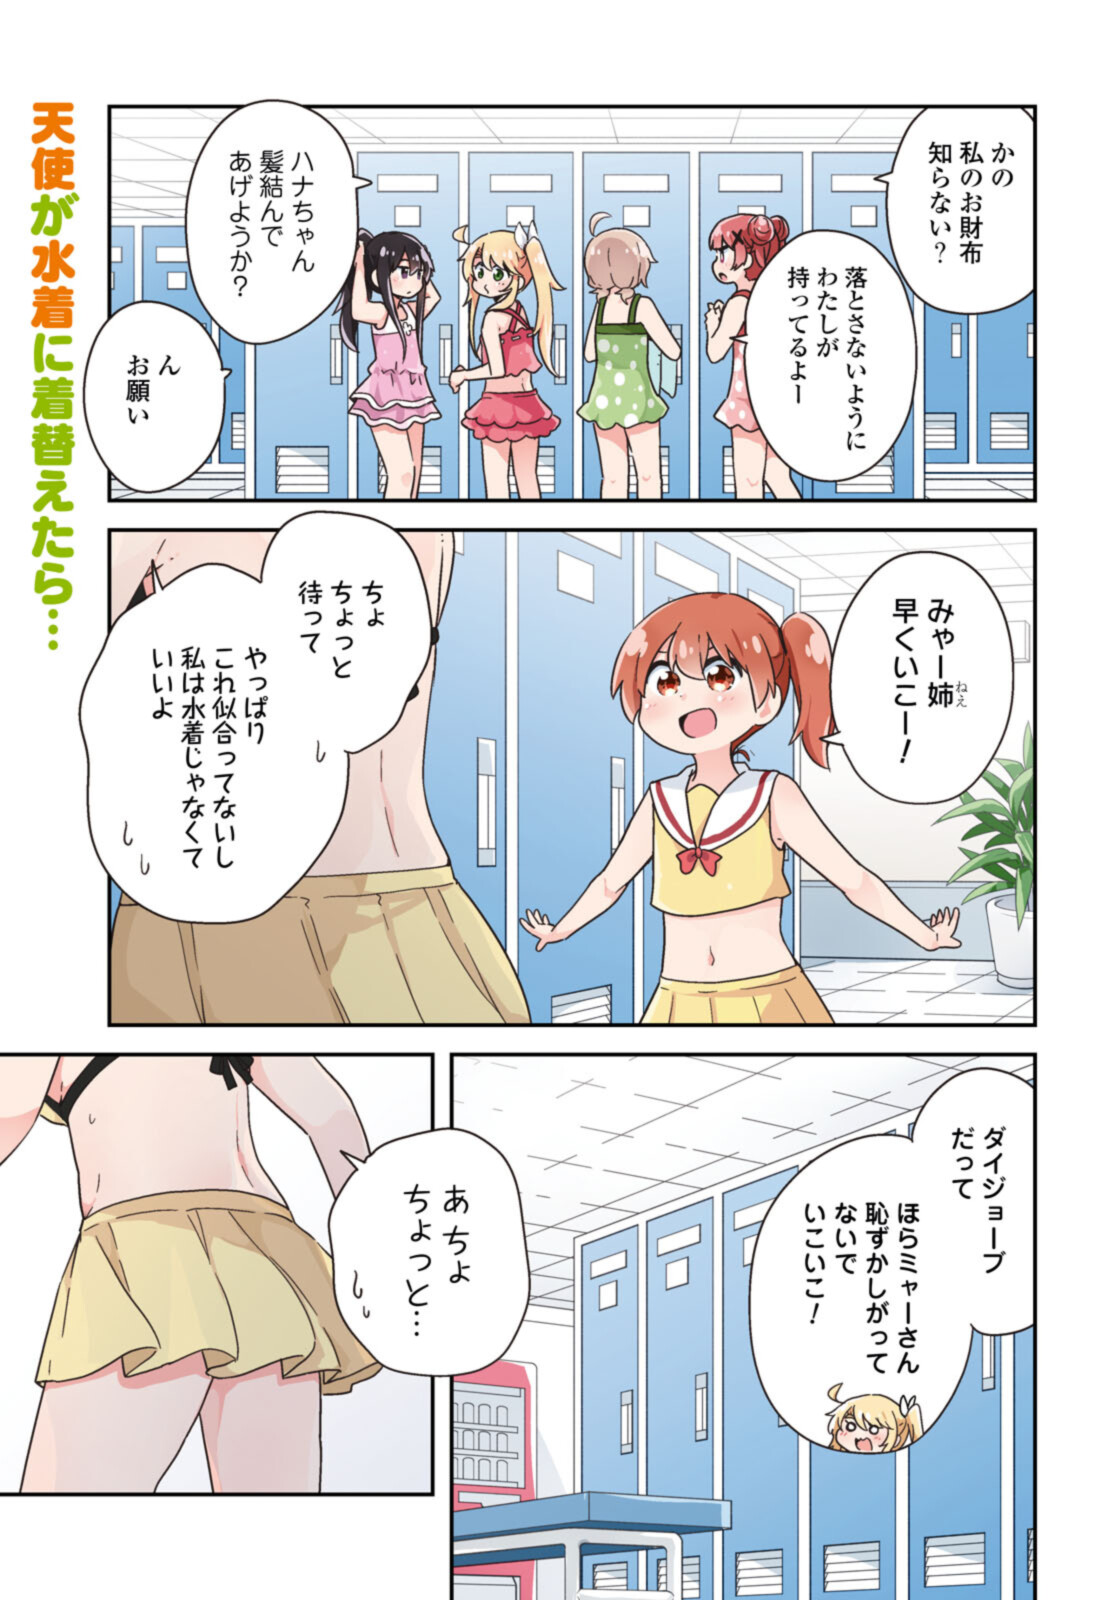 Wataten! An Angel Flew Down to Me 私に天使が舞い降りた！ 第94.1話 - Page 1